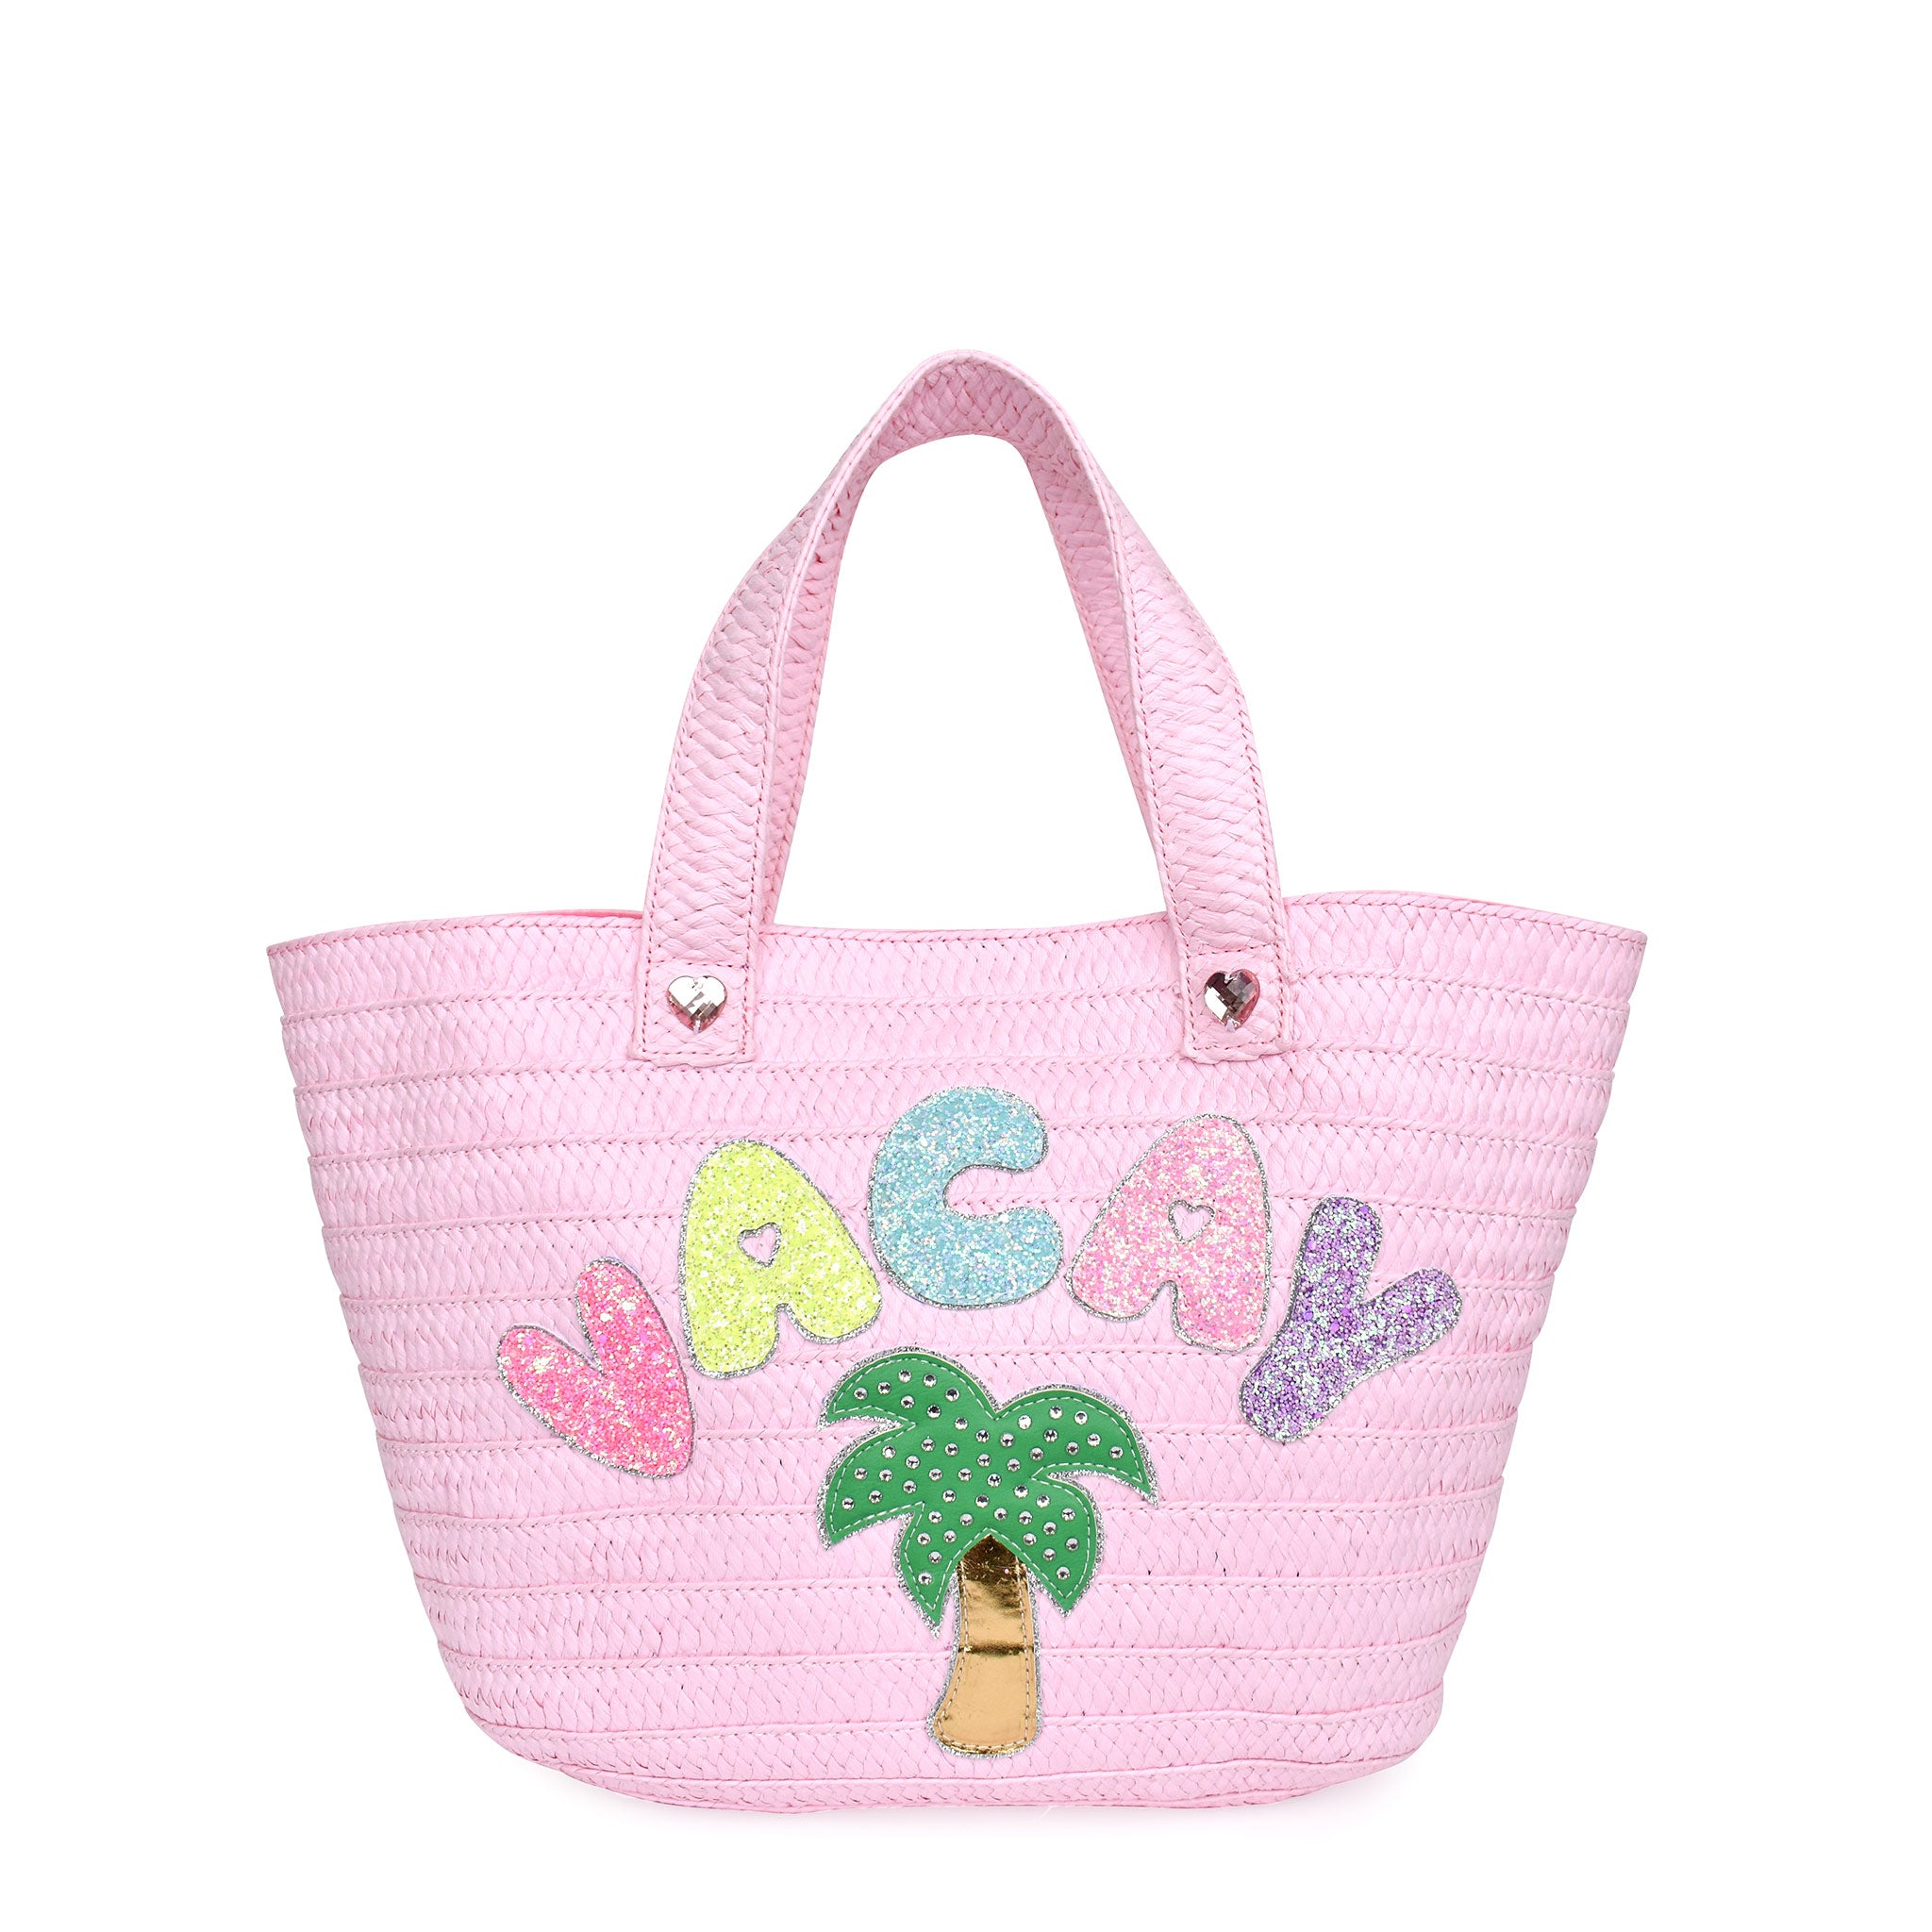 Front view of a pink straw beach tote with glitter bubble letters 'VACAY' and palm tree appliqué 